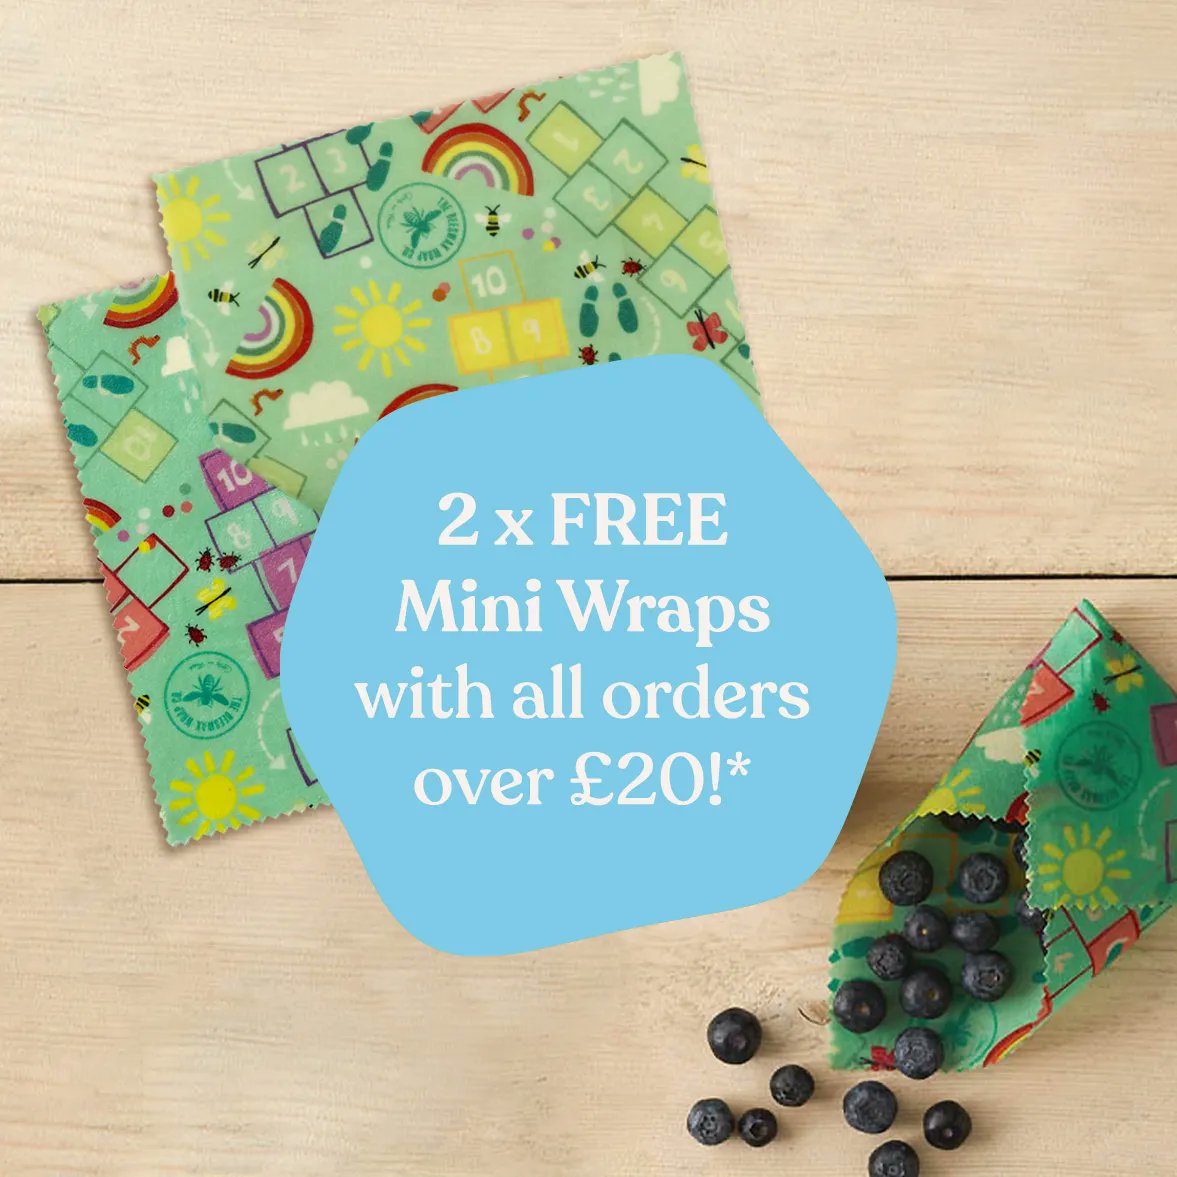 We're giving away 2 x FREE mini wraps with all orders over £20 this bank holiday weekend! 🎉 No need to add anything extra to your basket, we'll pop them in with every qualifying order over £20 (excluding postage) #bankholidayweekend #summerbankholiday #beeswaxwraps